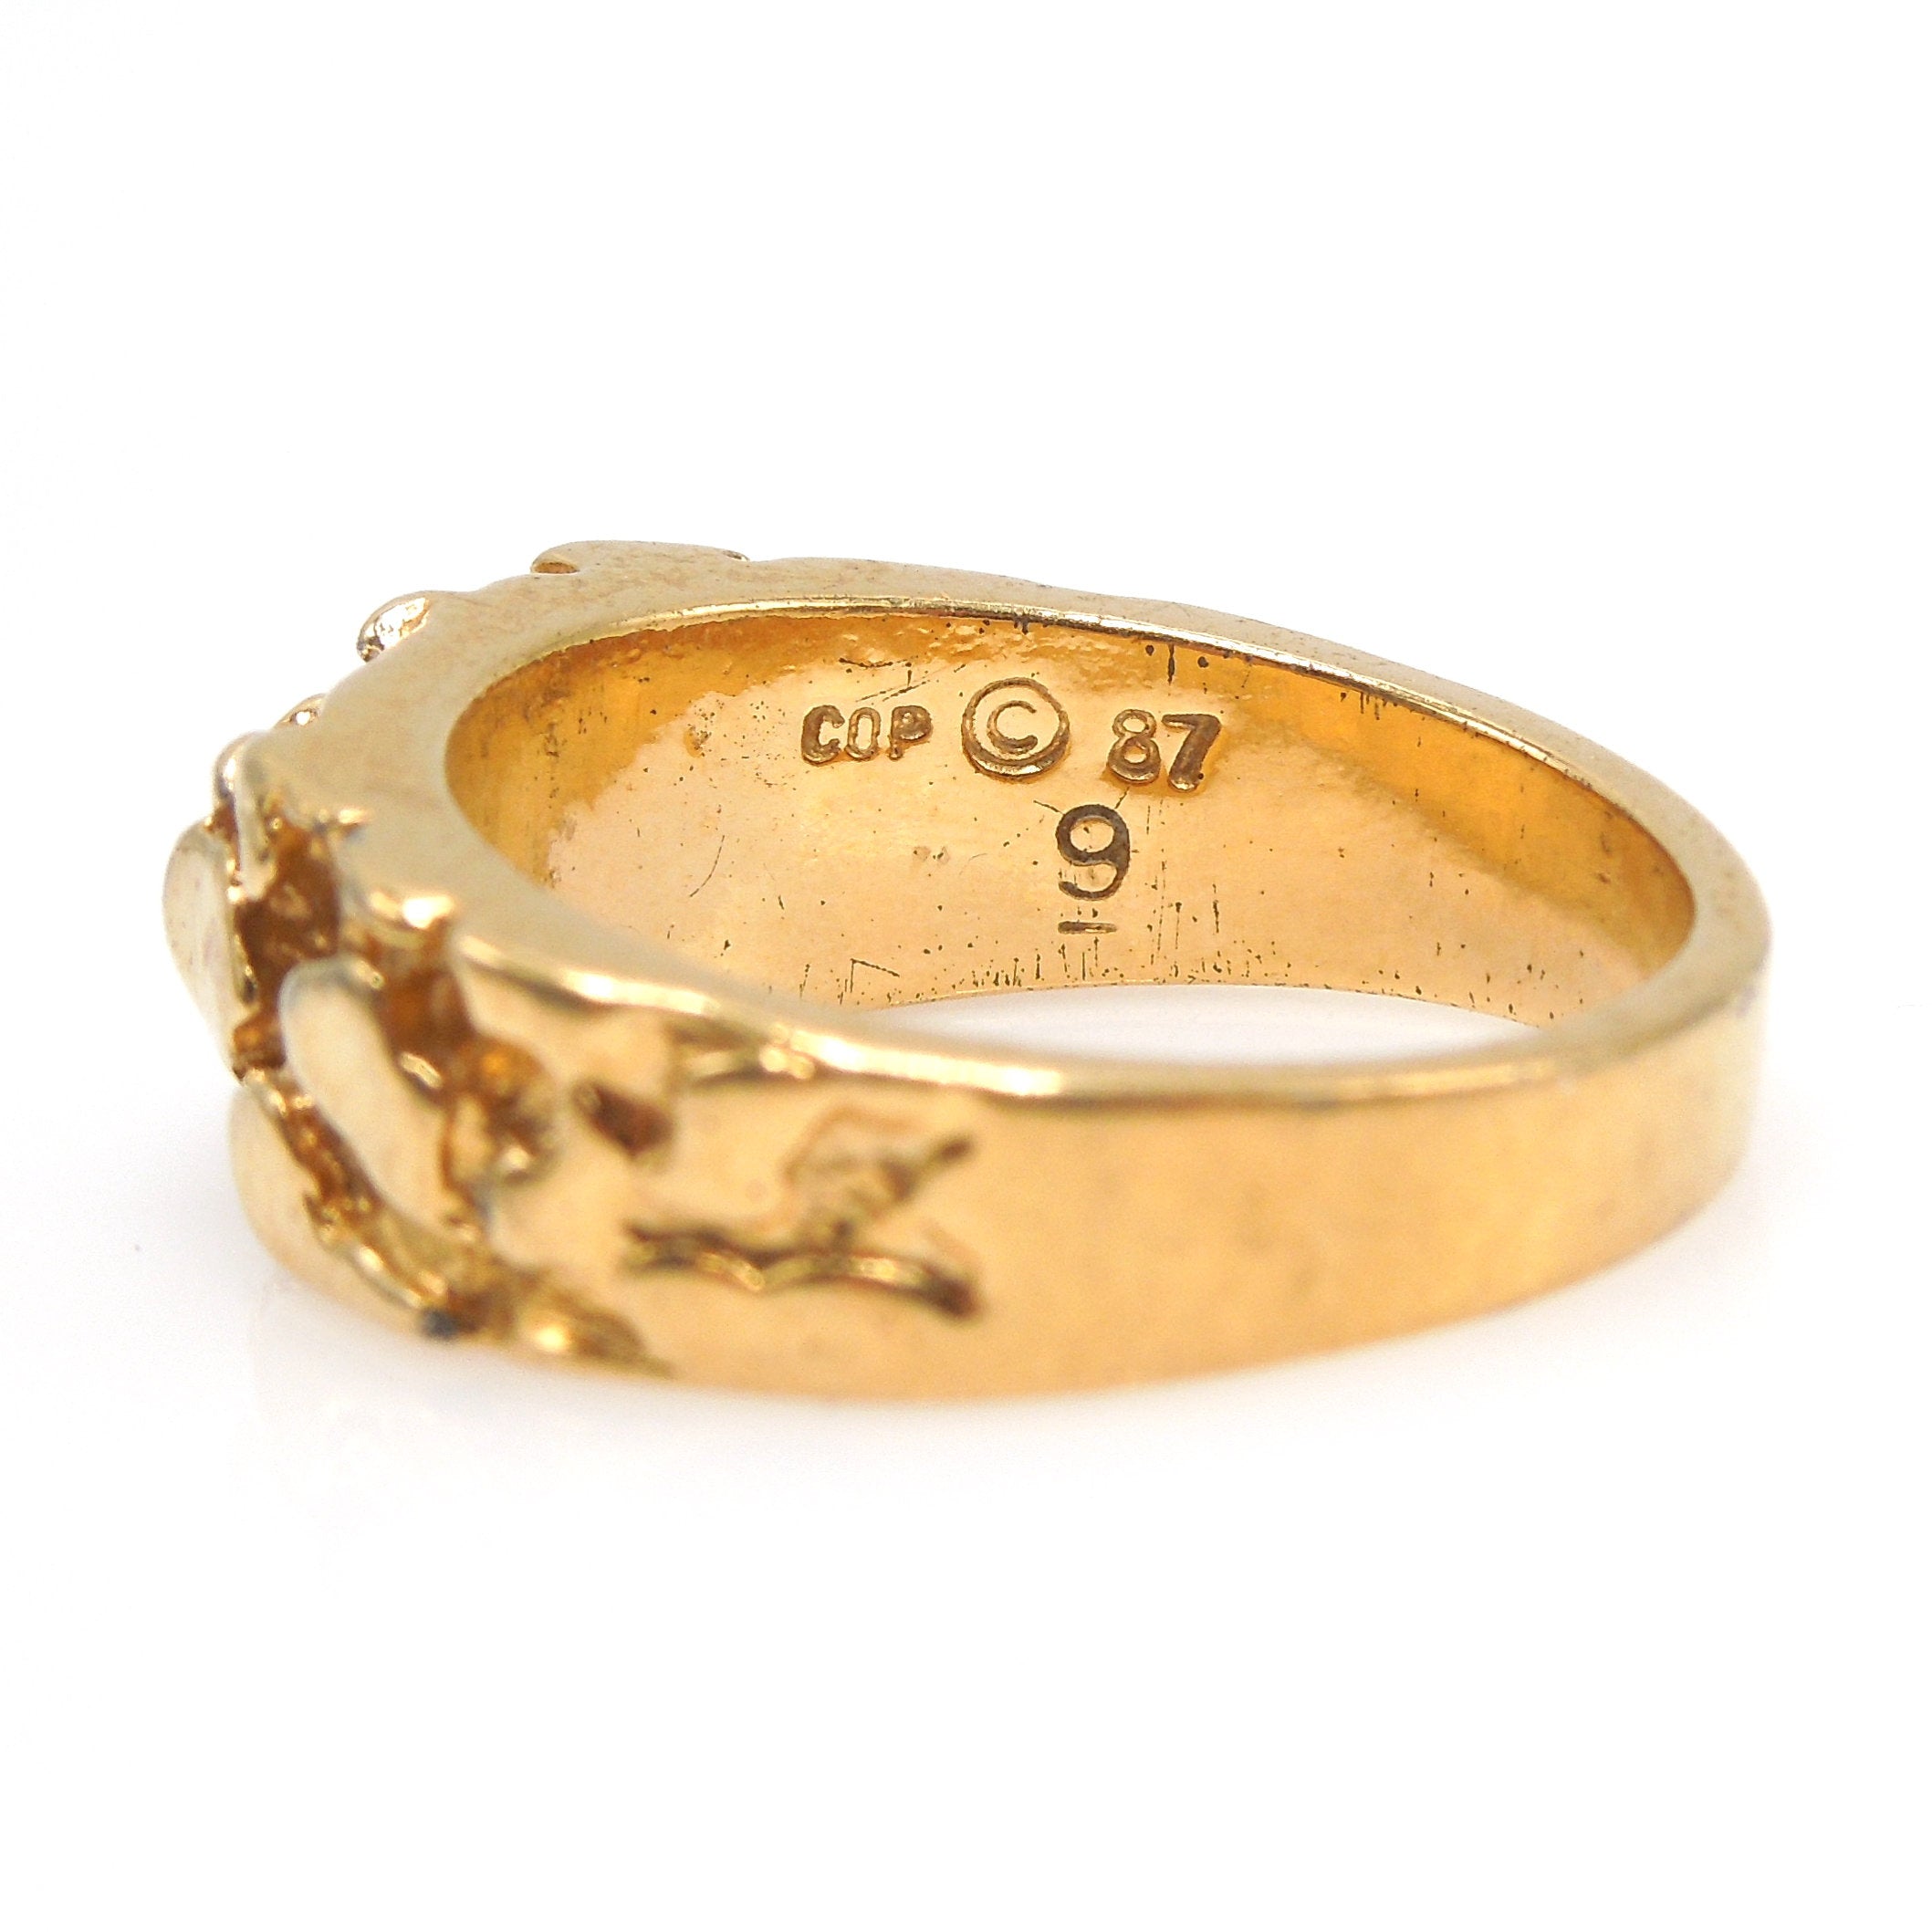 8.5mm Wide Gents Nugget Style Yellow Gold Ring - Size 9